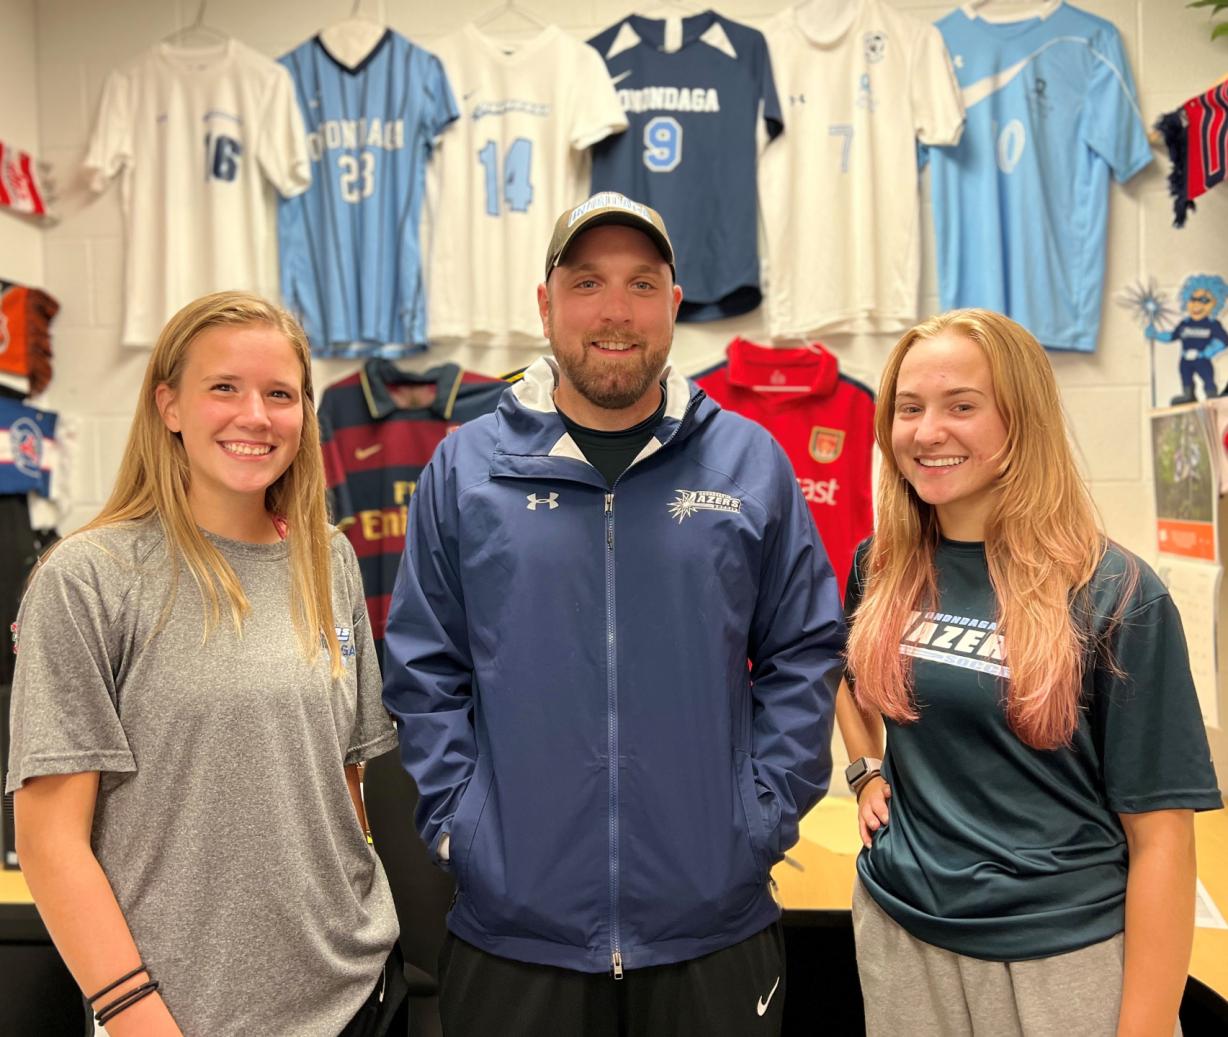 Women's Soccer Head Coach Sean St. Dennis (center) is pictured with two of his top players, Madison Pelton (left) and Lynnae Russell (right).